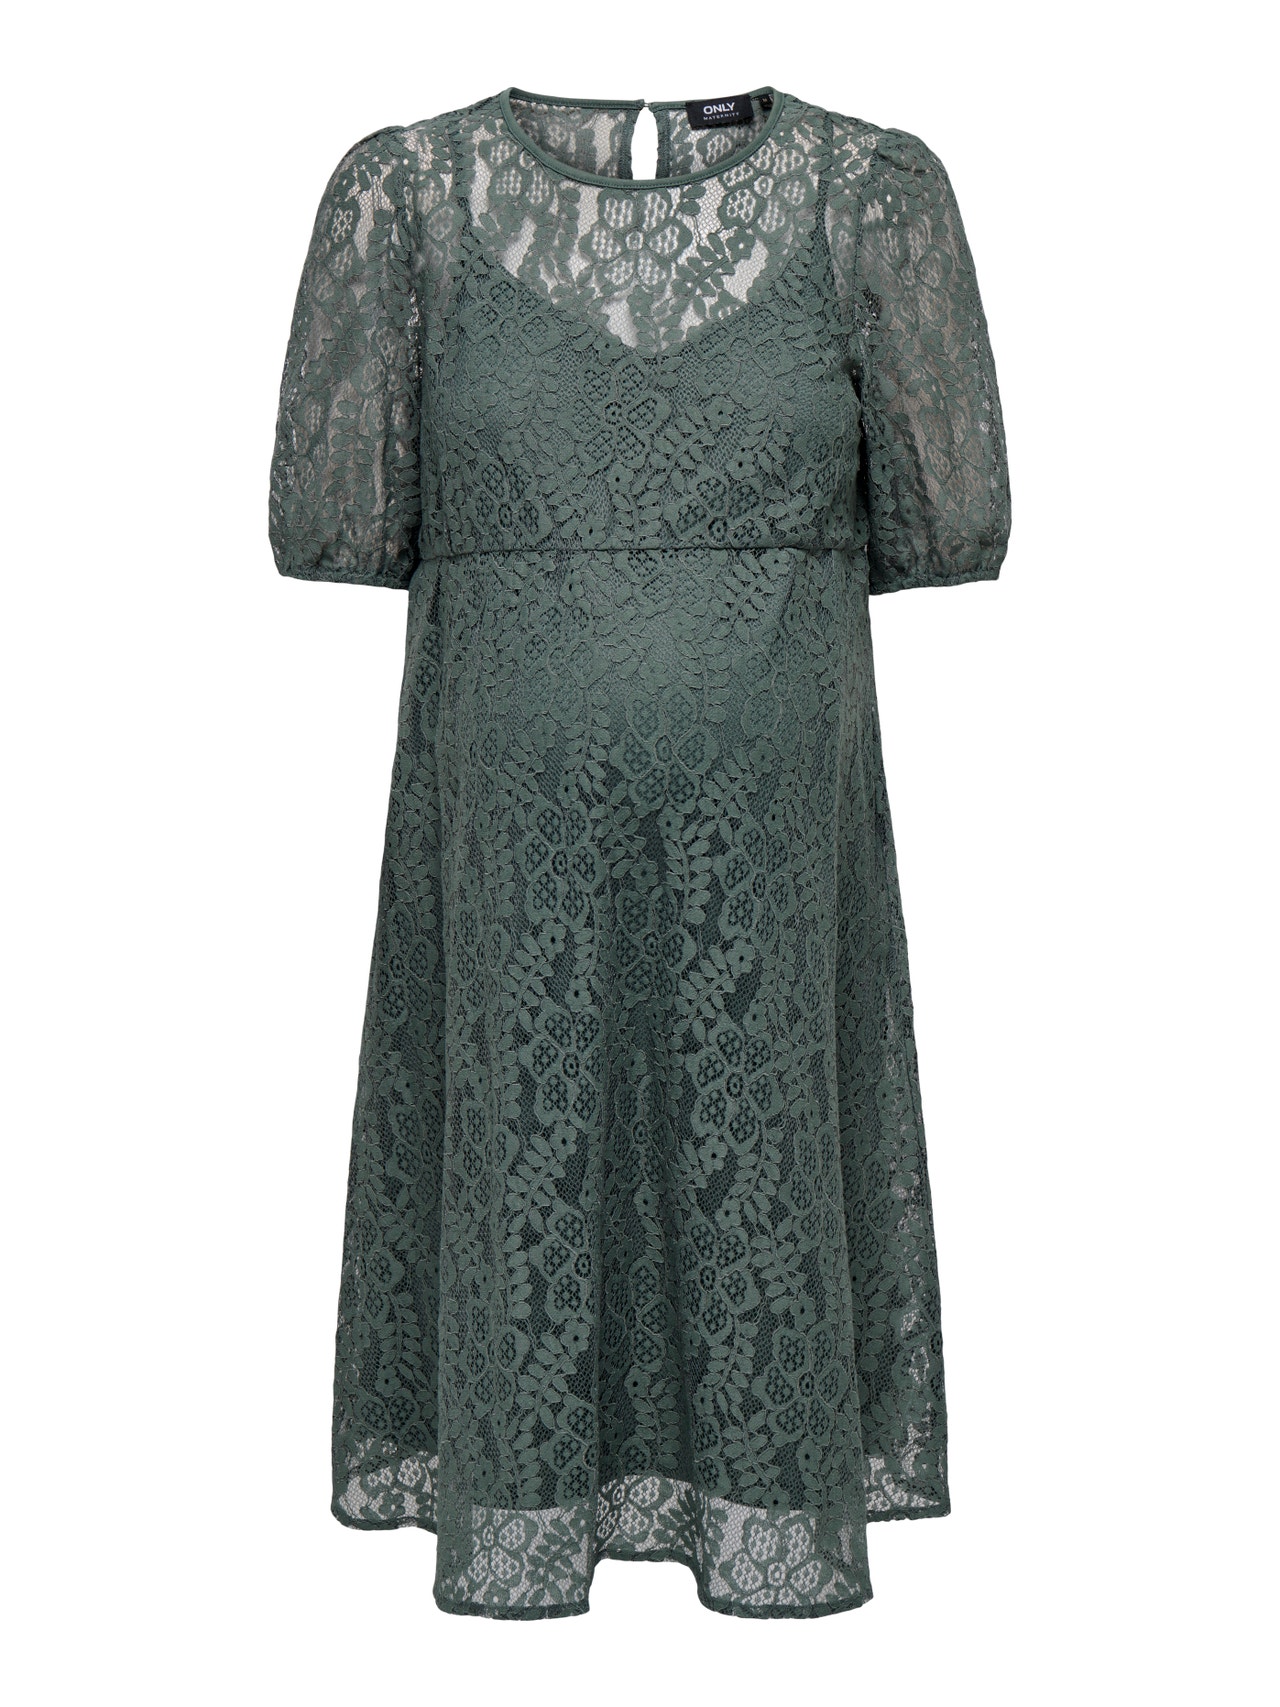 Mama lace dress with 25% discount!